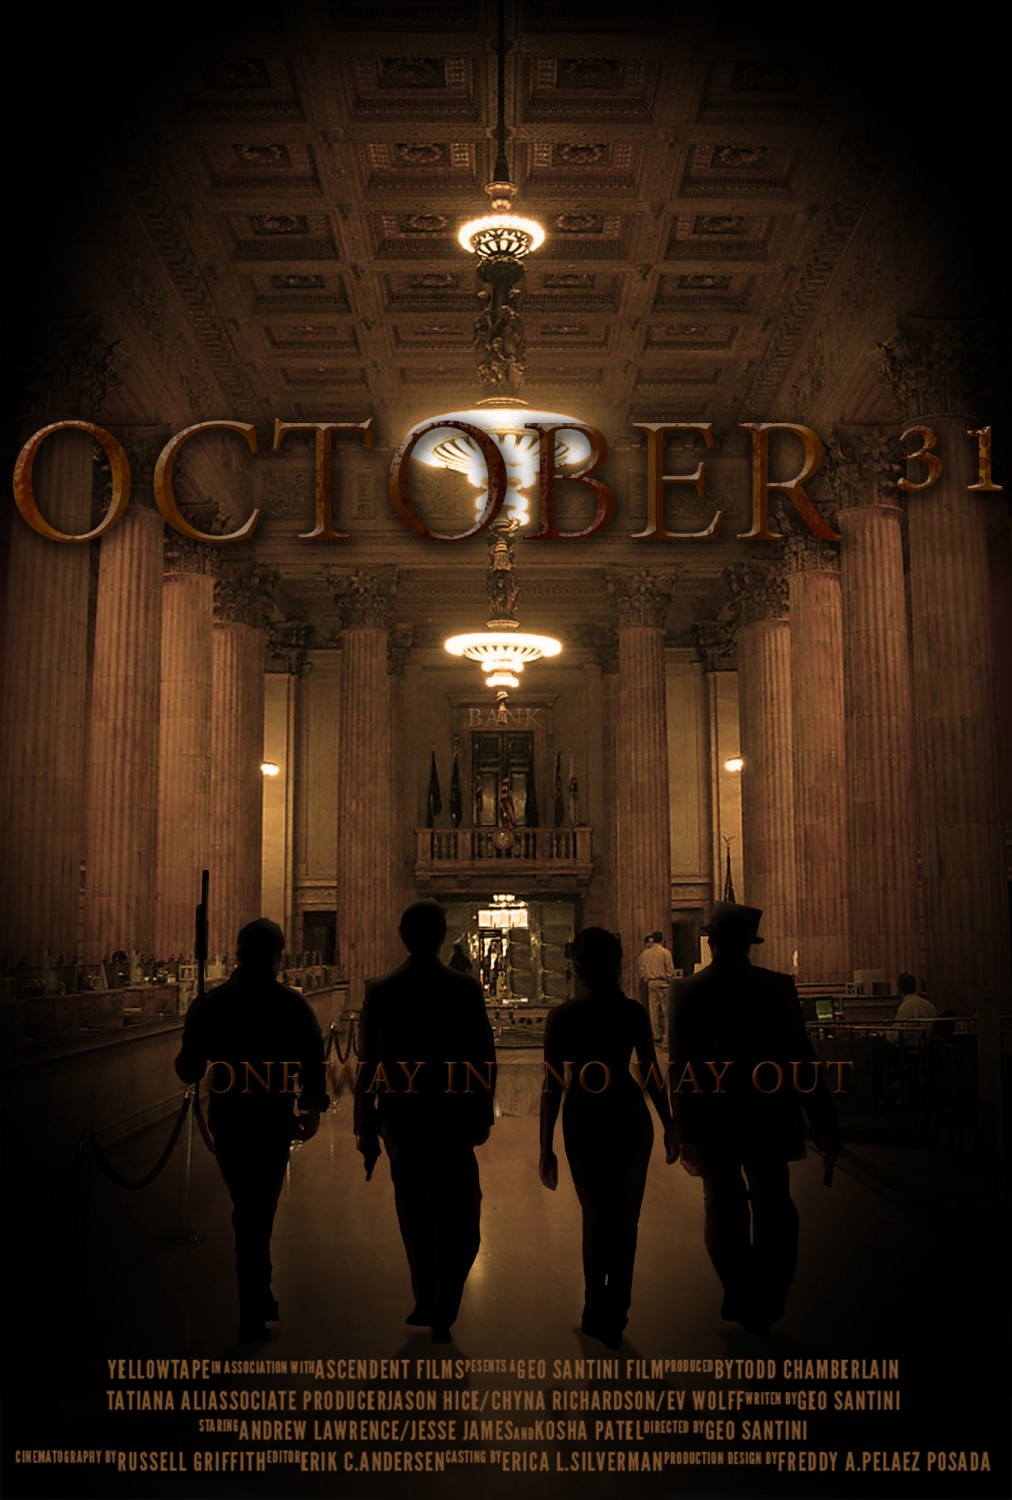 Extra Large Movie Poster Image for October 31